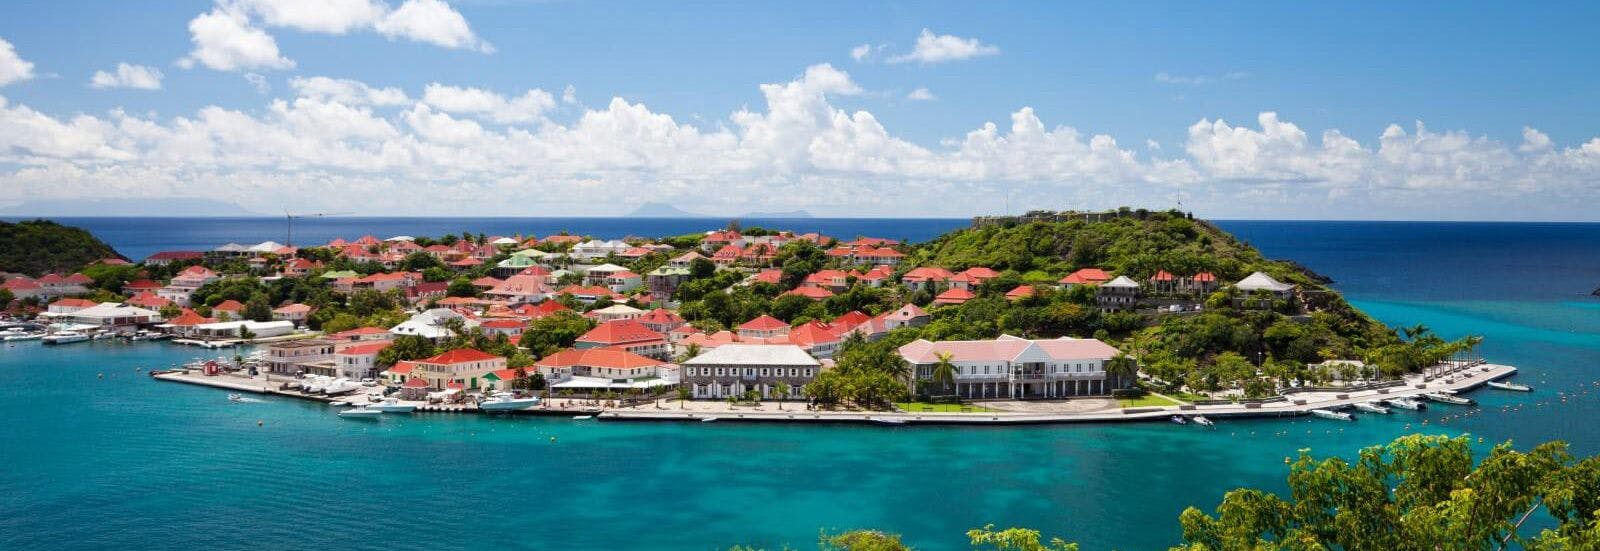 Gustavia town by the Caribbean Sea